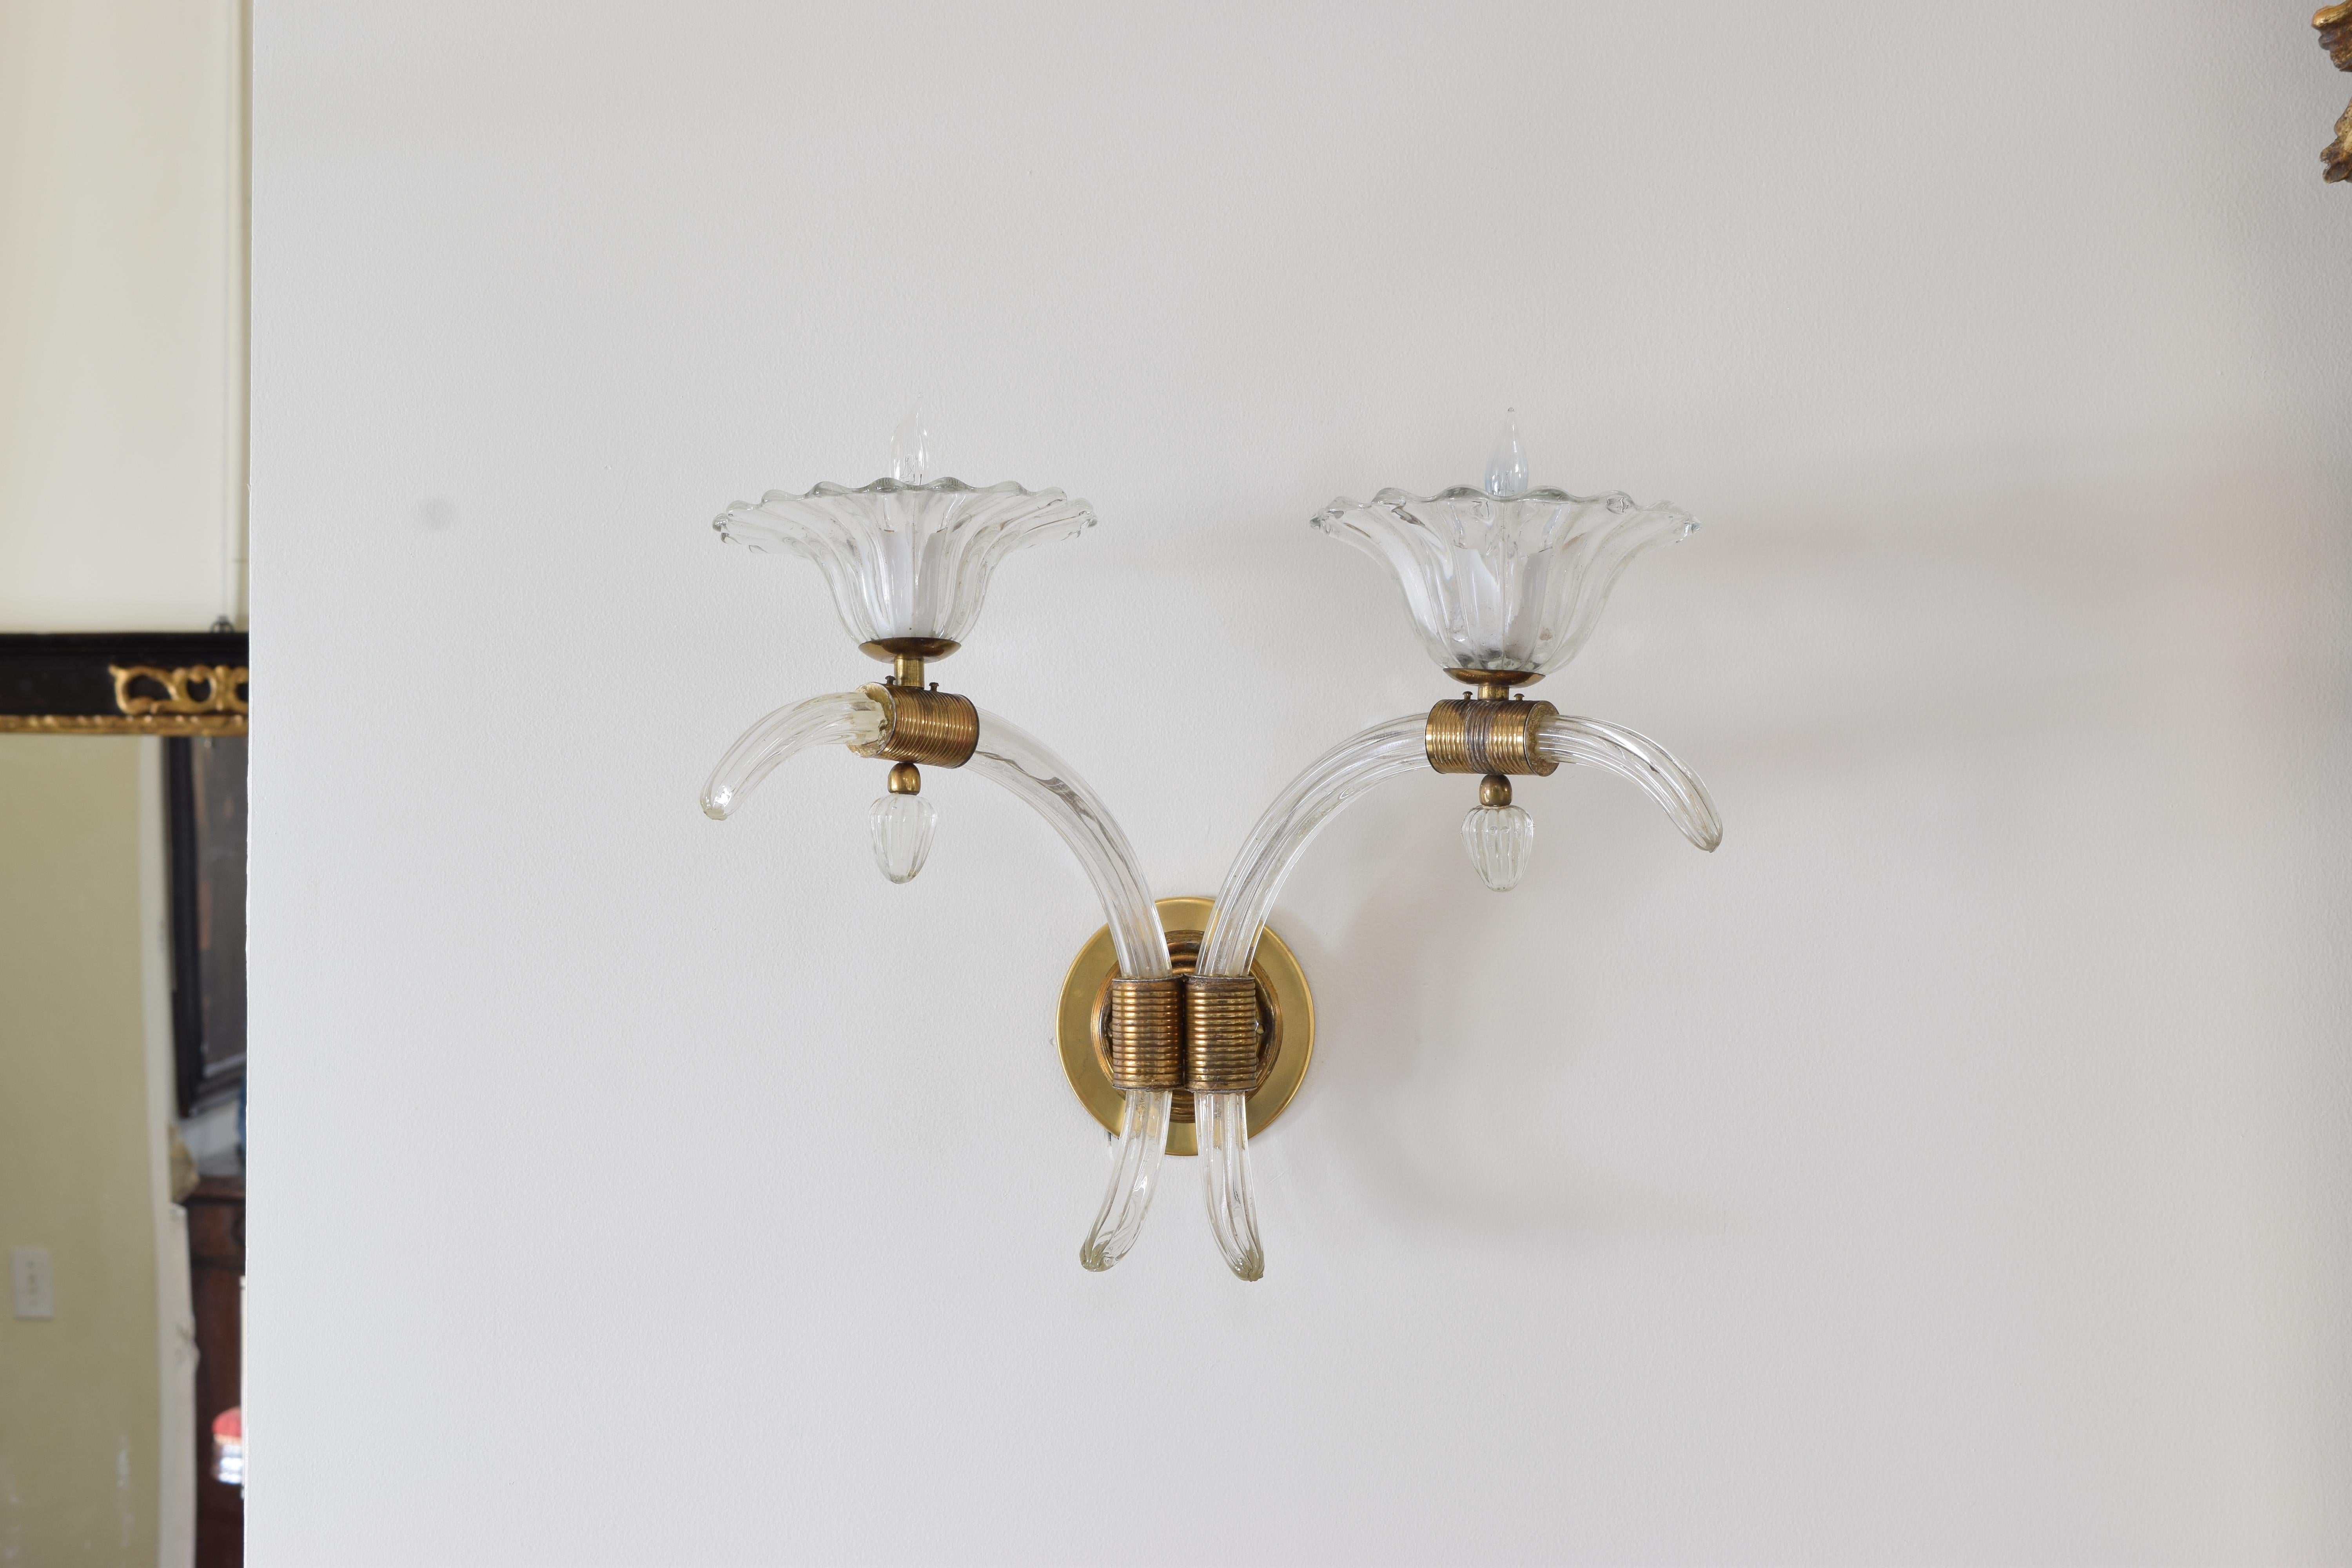 The circular bass backplates with molded keepers issuing blown glass arms both upper and lower, the blown glass shades atop molded brass mounts.